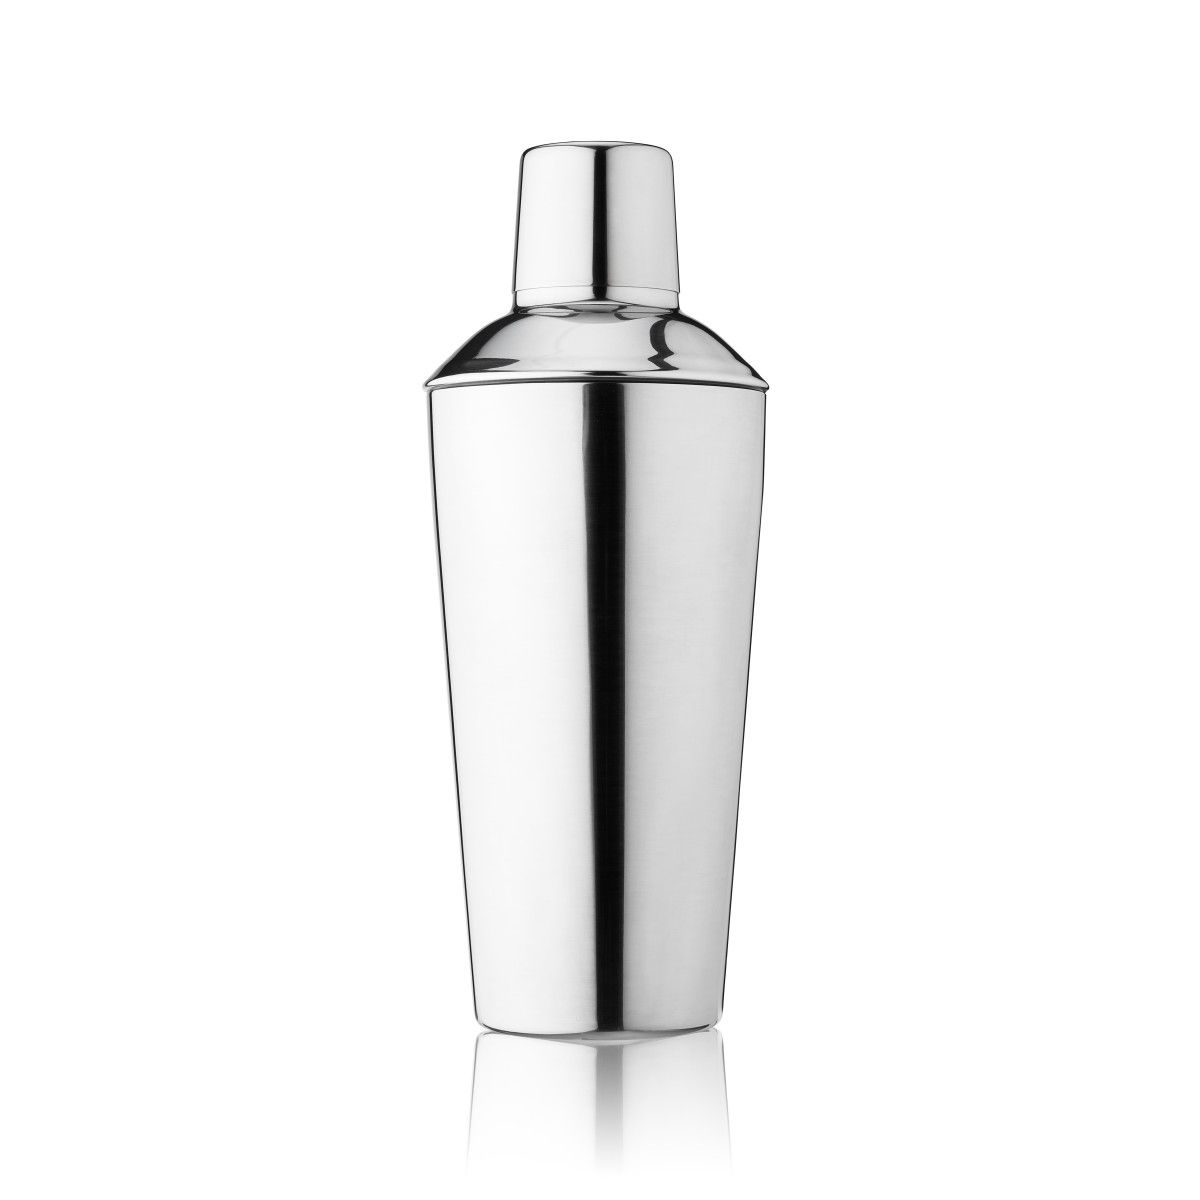 Bulk Cocktail Shakers  Wholesale Cocktail Shaker, Stainless Steel